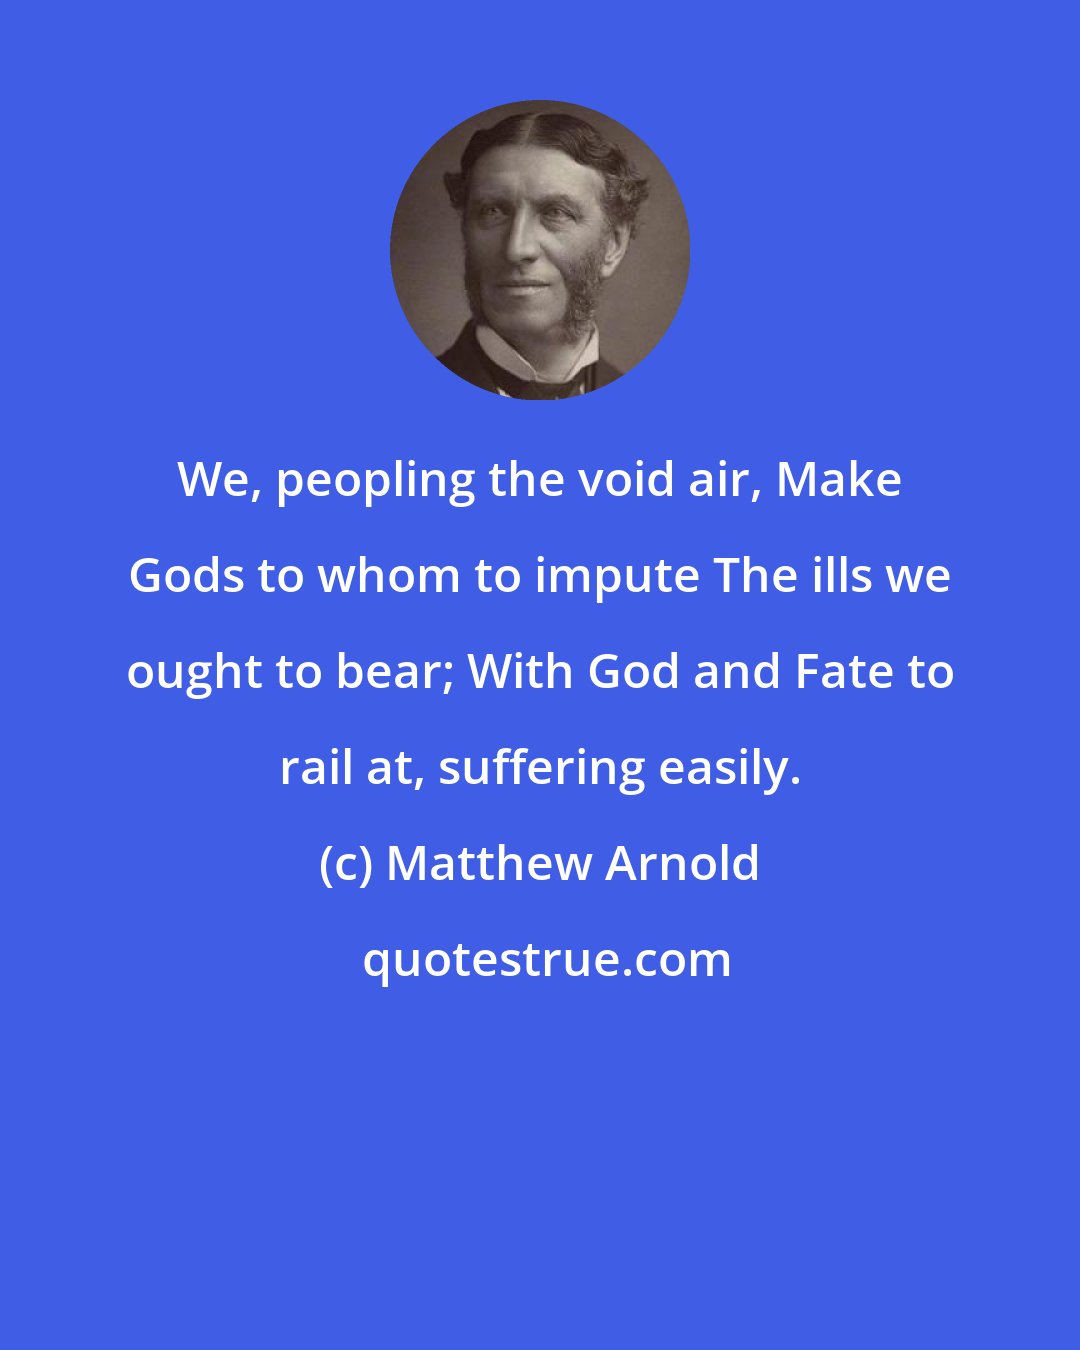 Matthew Arnold: We, peopling the void air, Make Gods to whom to impute The ills we ought to bear; With God and Fate to rail at, suffering easily.